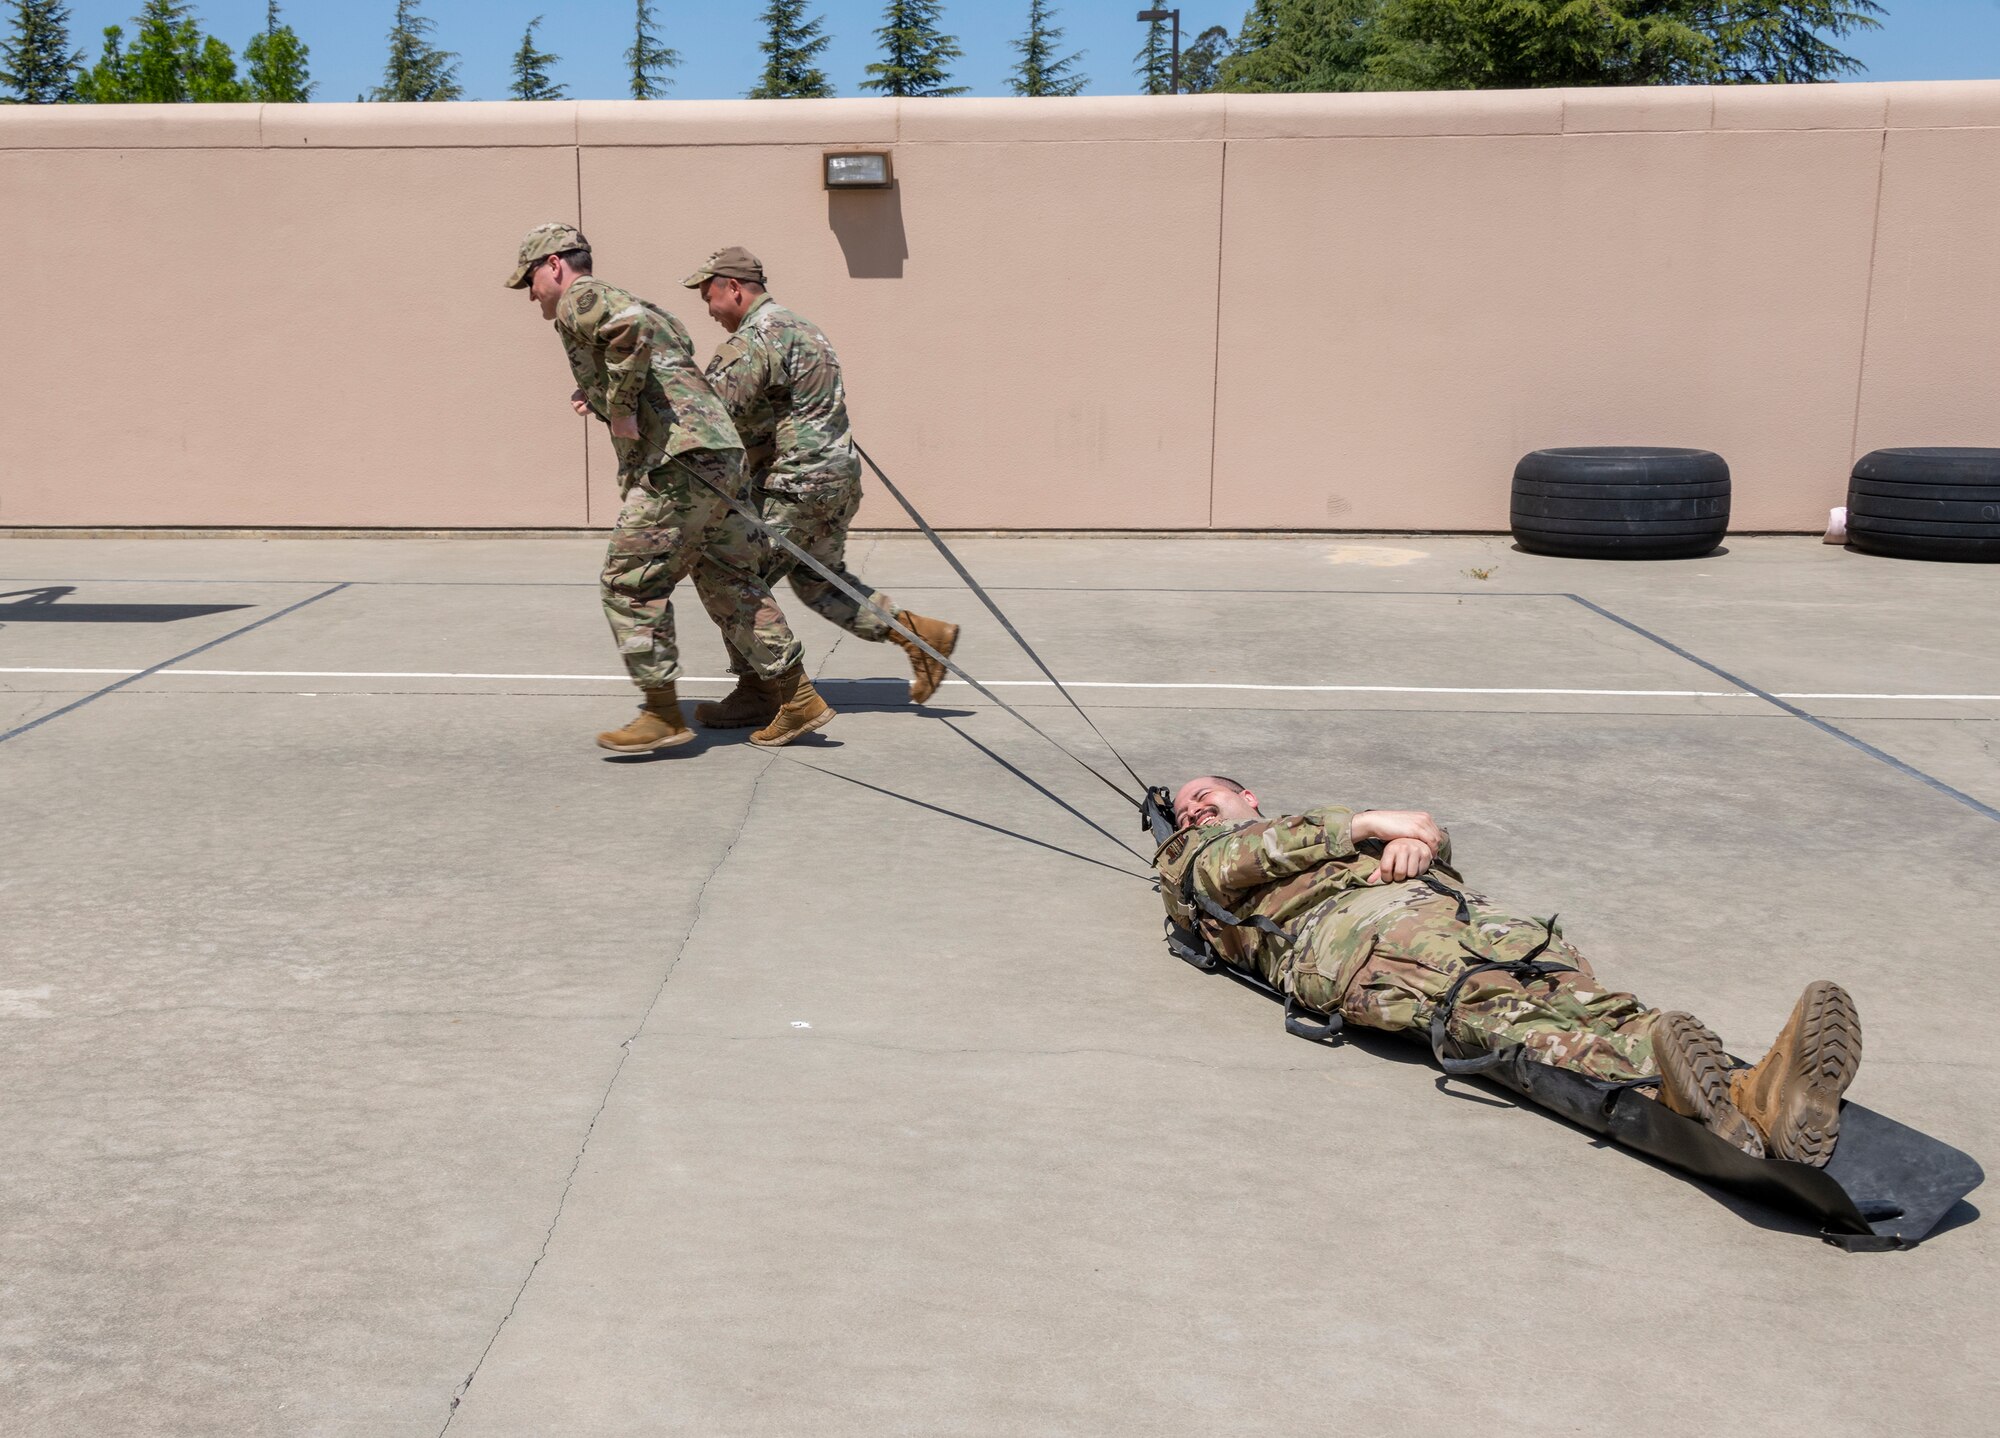 Airmen pull an Airman on a portable human transporting system.